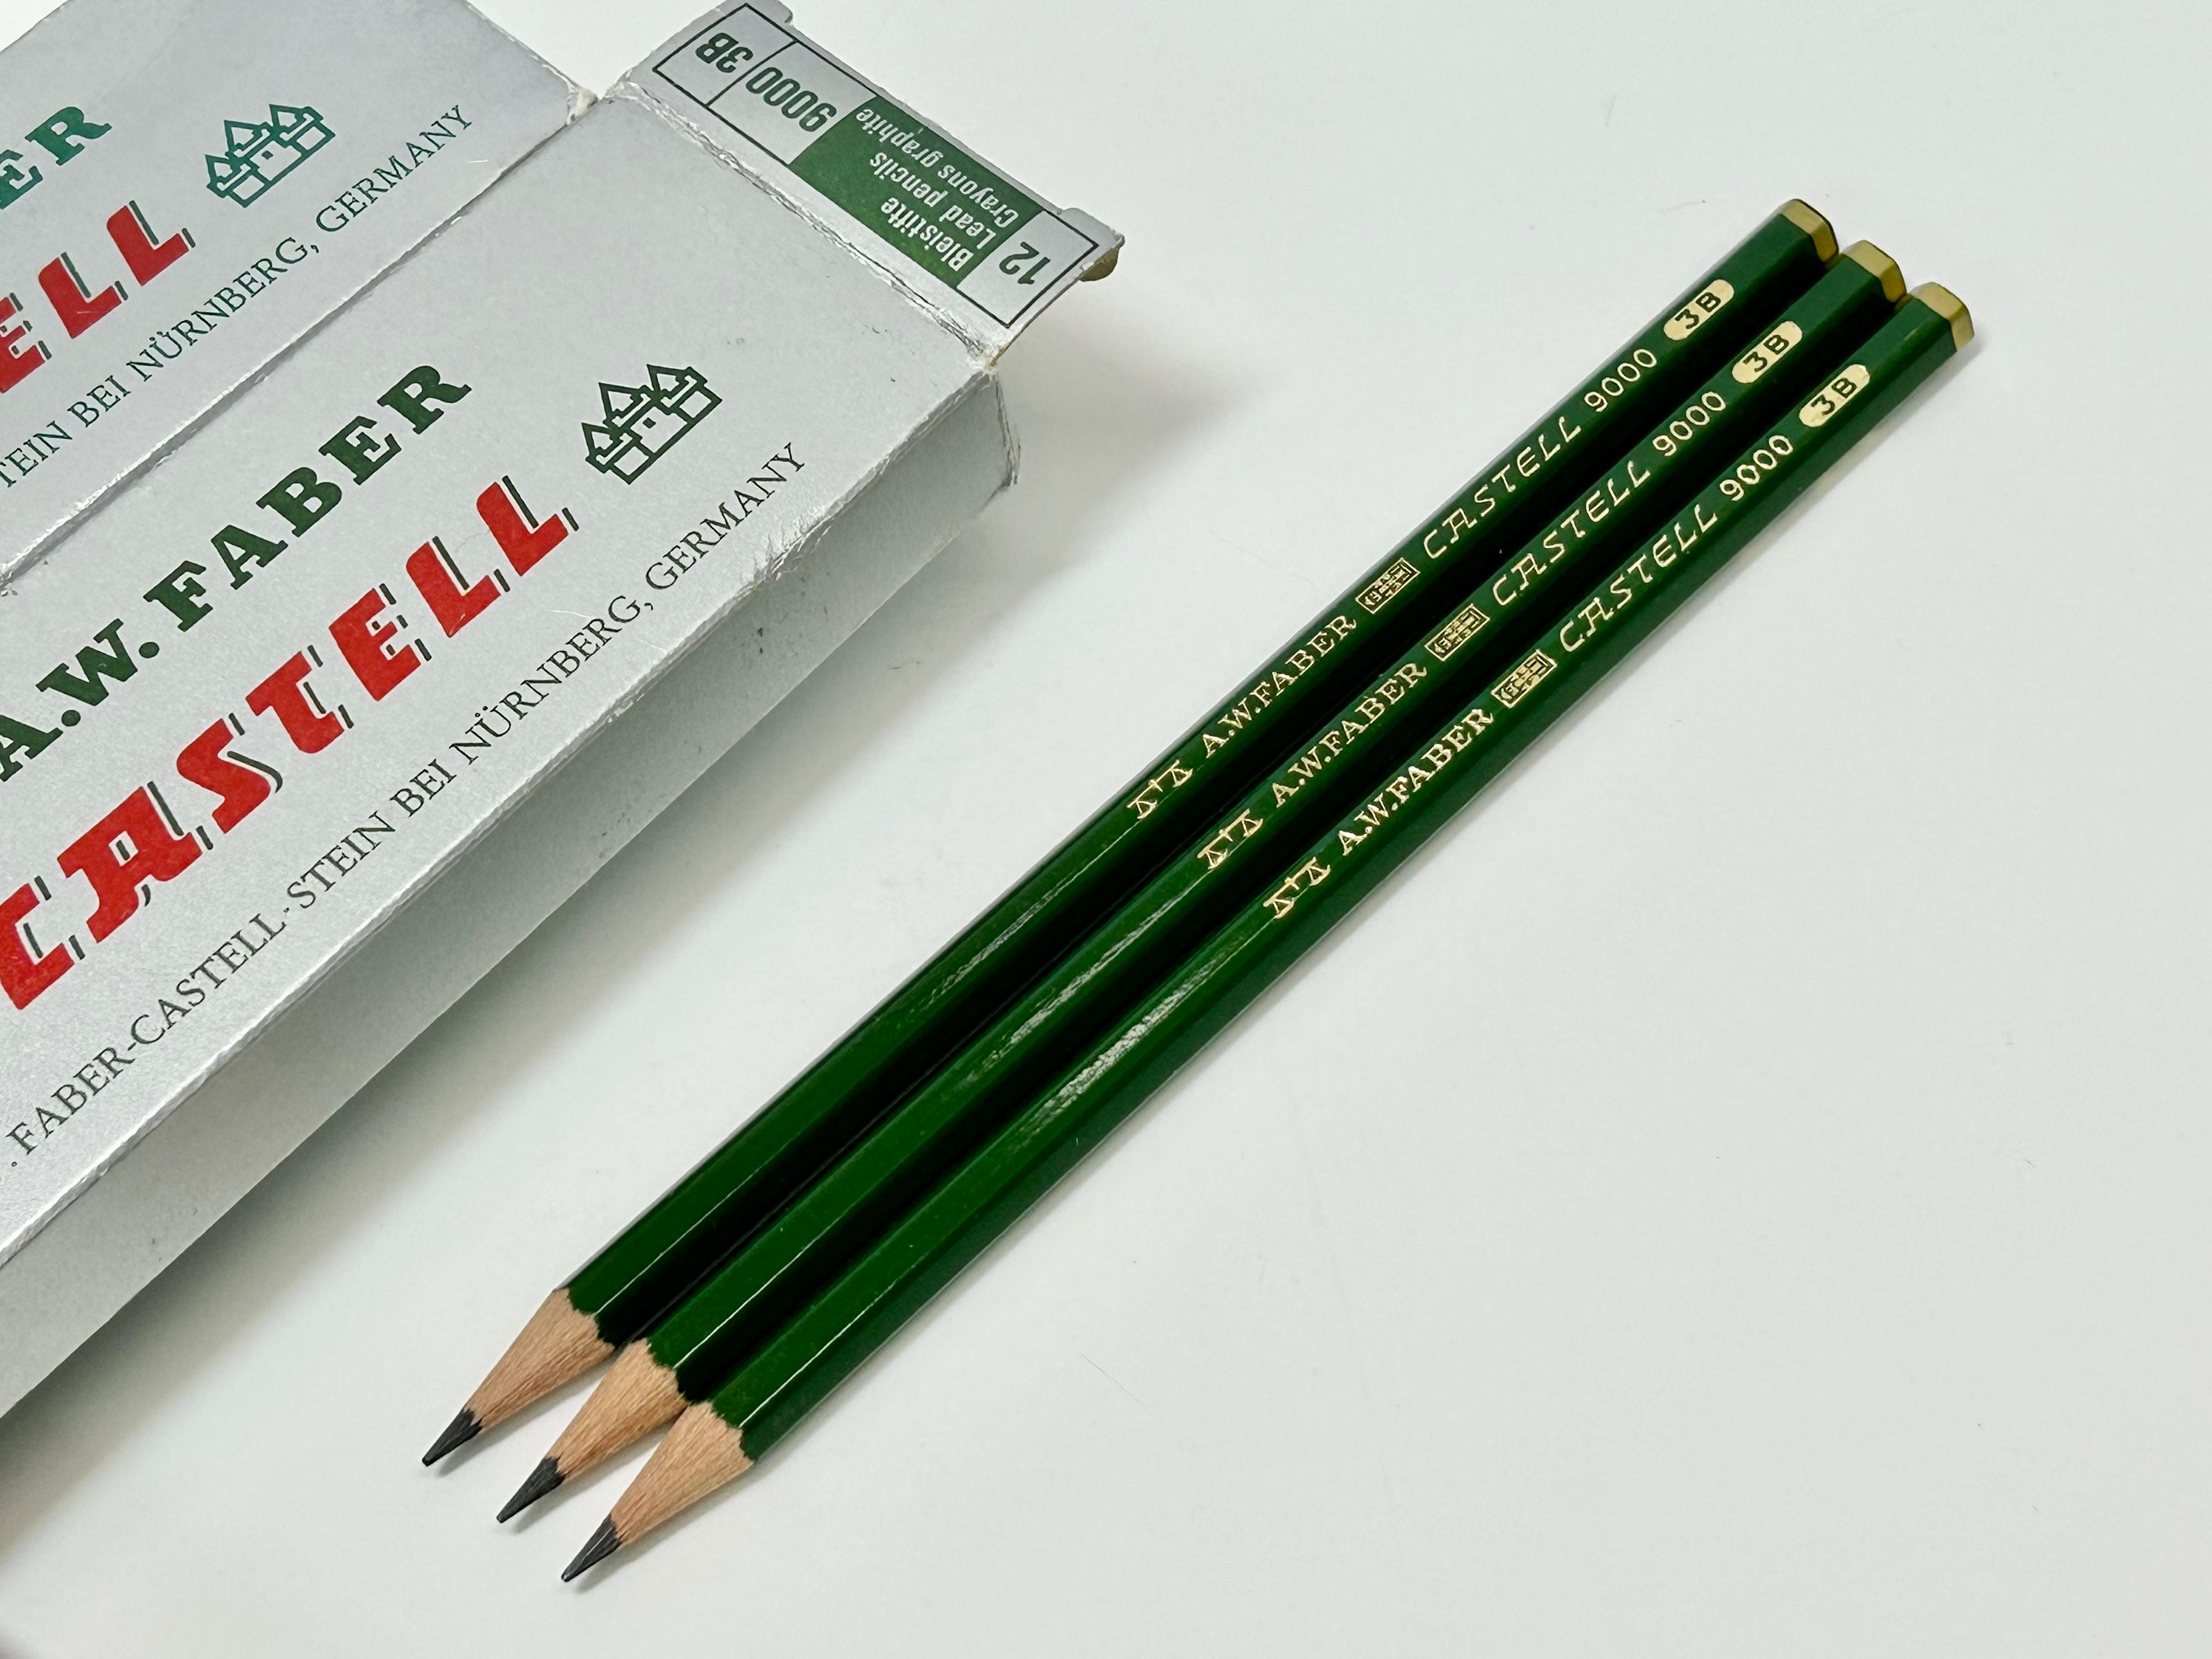 Faber-Castell 9000 Pencil 3B